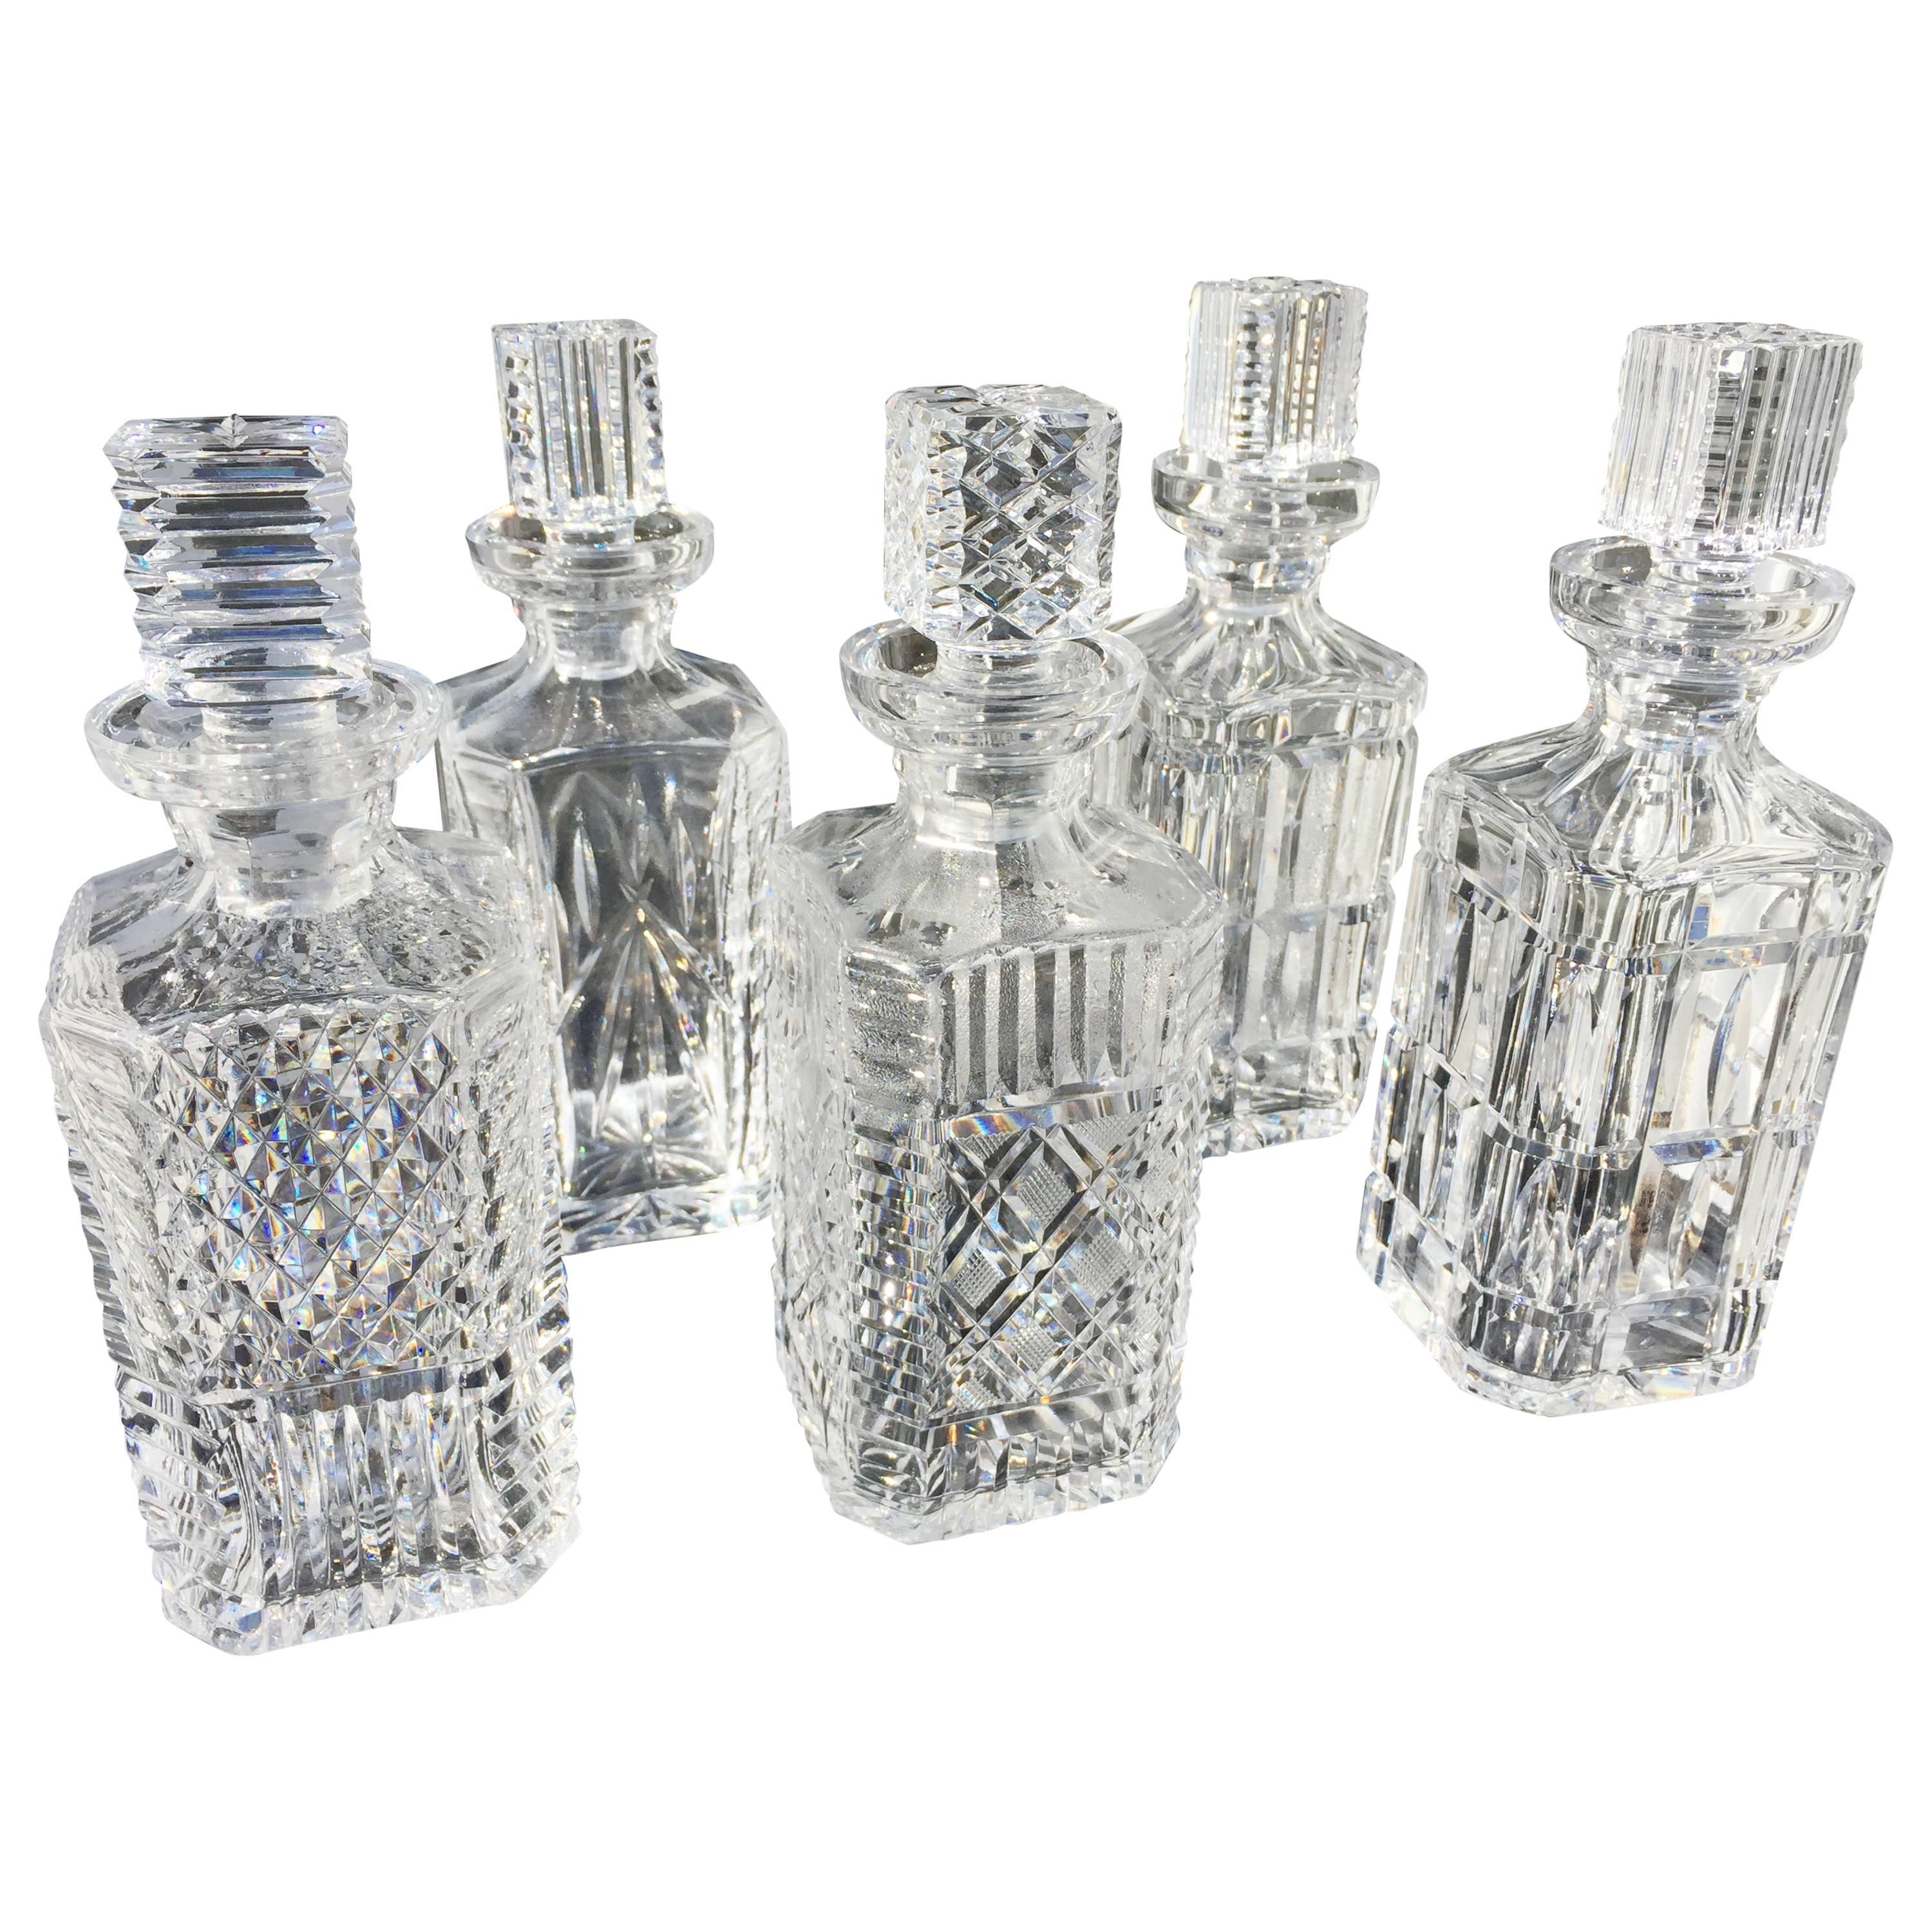 Elegant Set of Five Waterford Cut Crystal Decanters Mid-20th Century